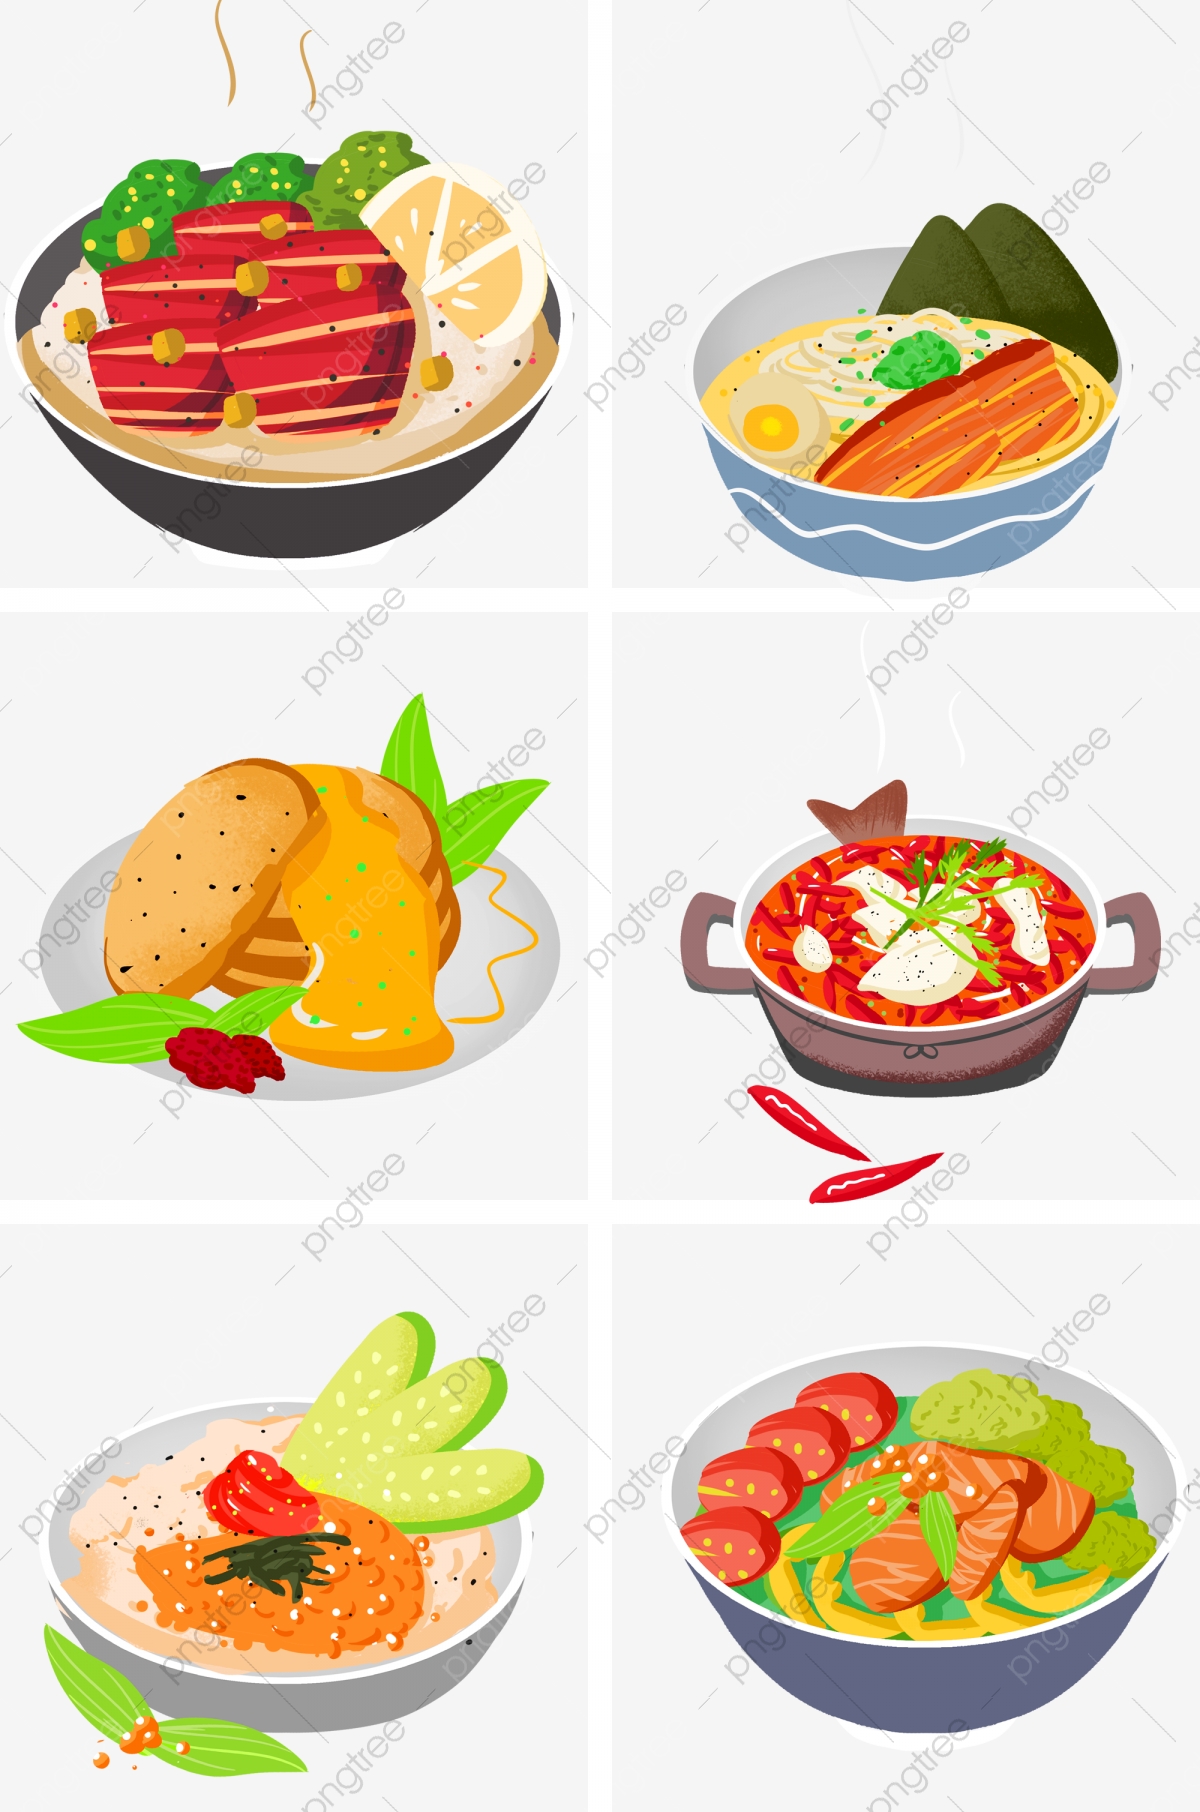 meal clipart western food